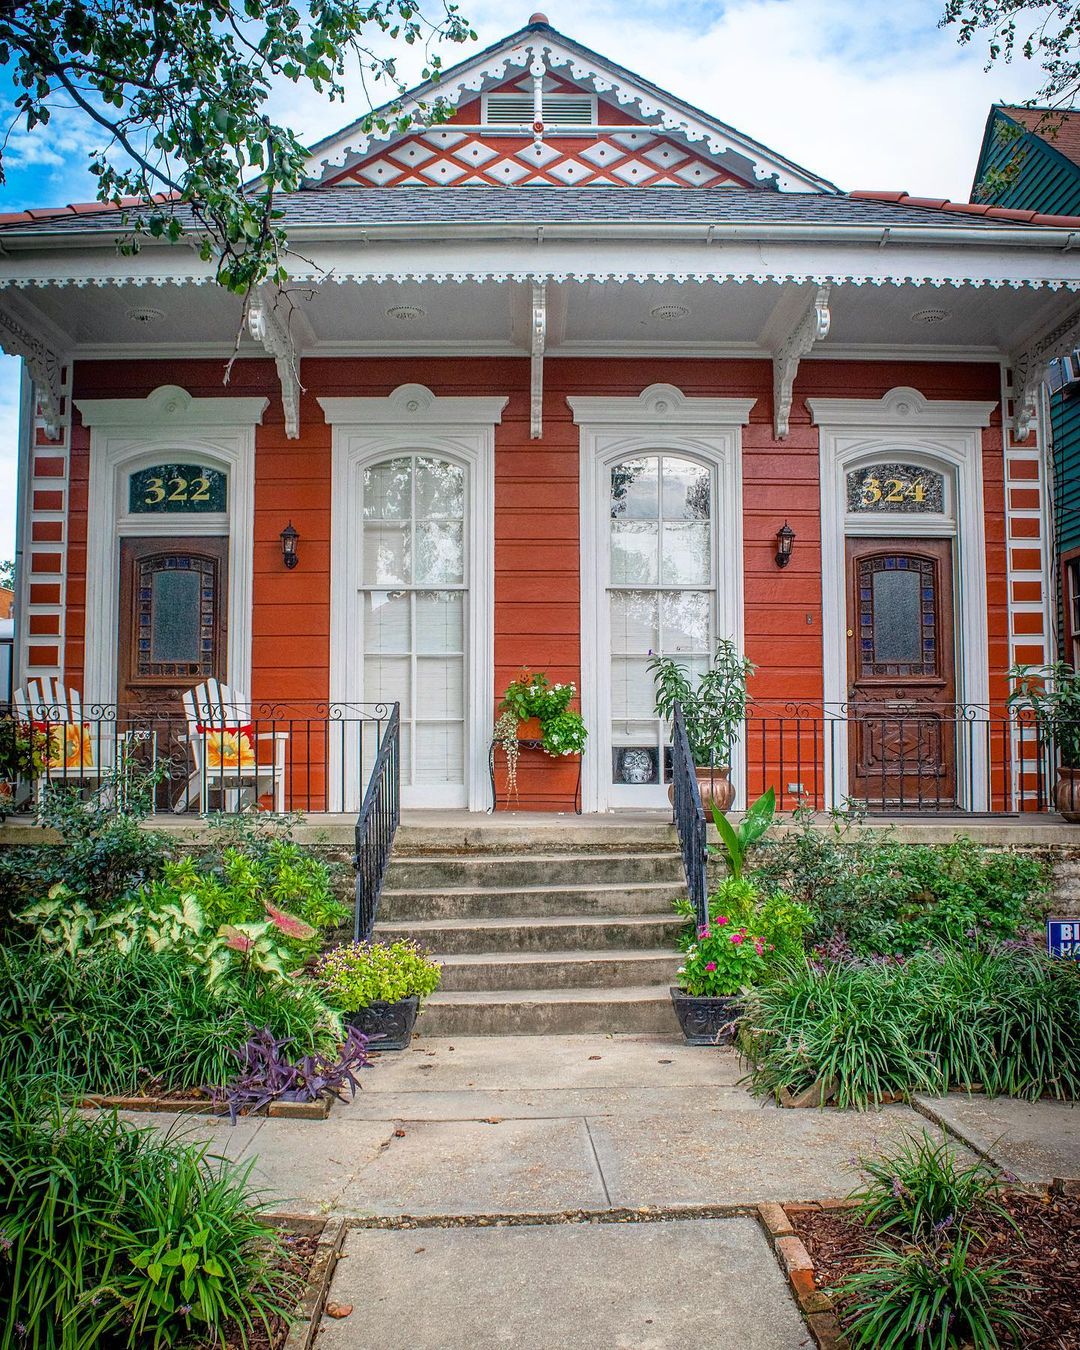 Charming, red Creole cottage in Algiers Point neighborhood of New Orleans. Photo by Instagram user @risingcrescent